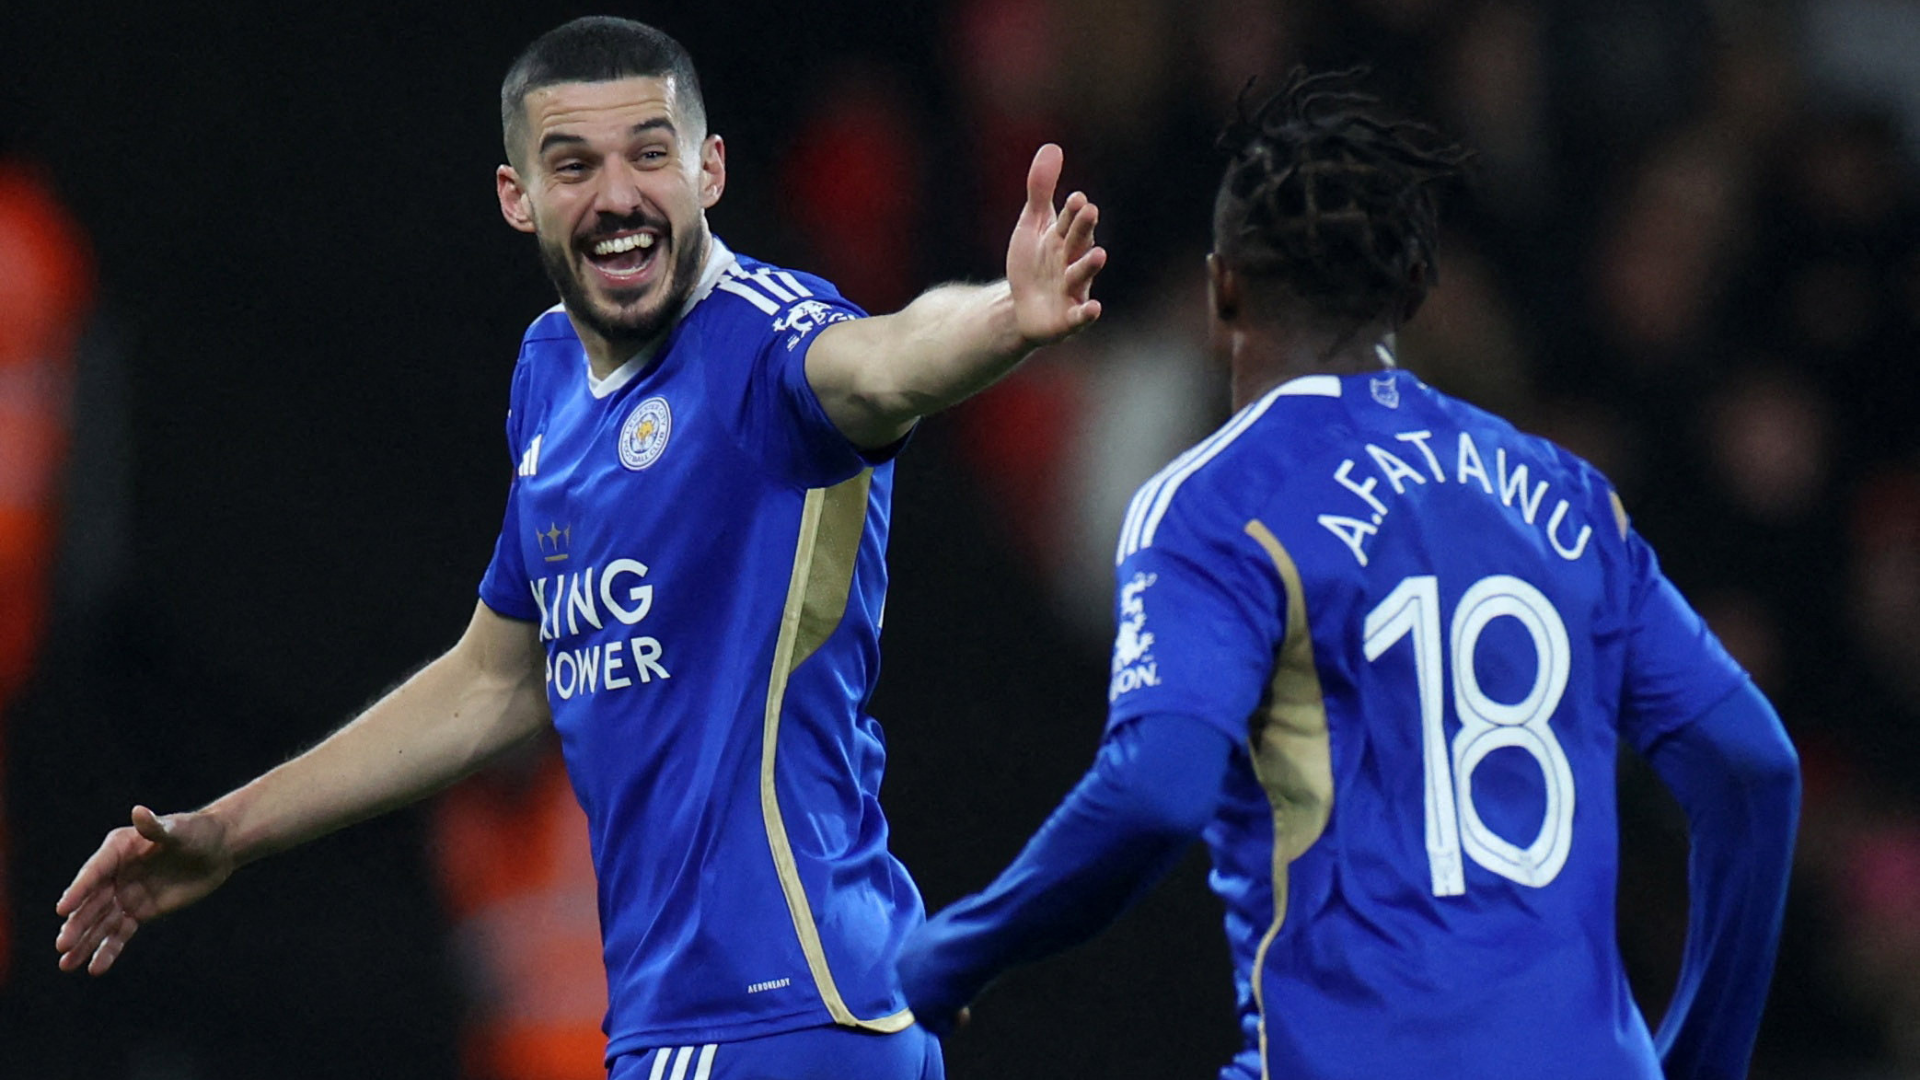 Ipswich Town should swoop for Leicester City defender Conor Coady